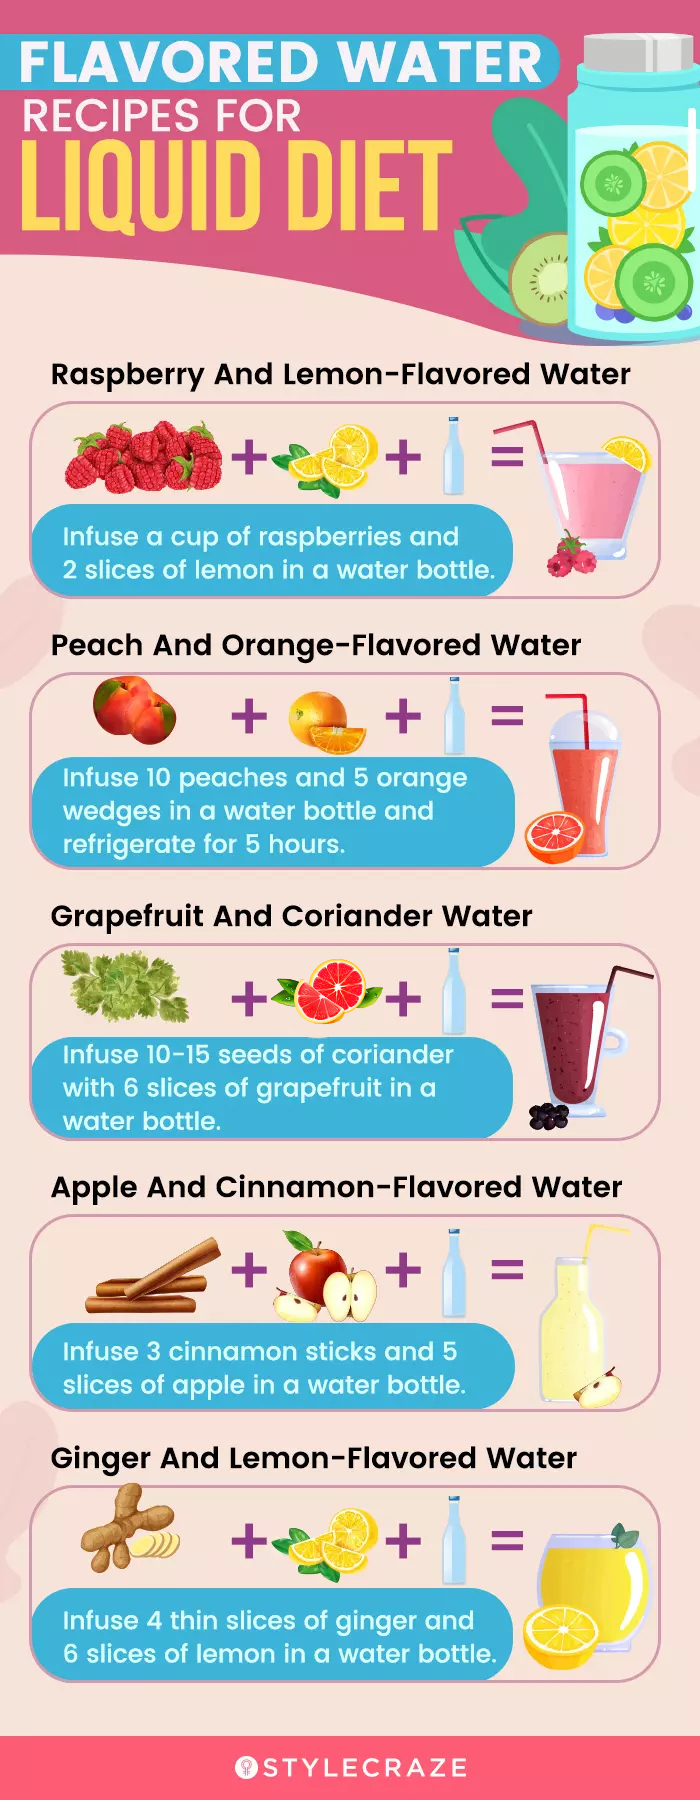 Clear Liquid Diet: Benefits and How It Works